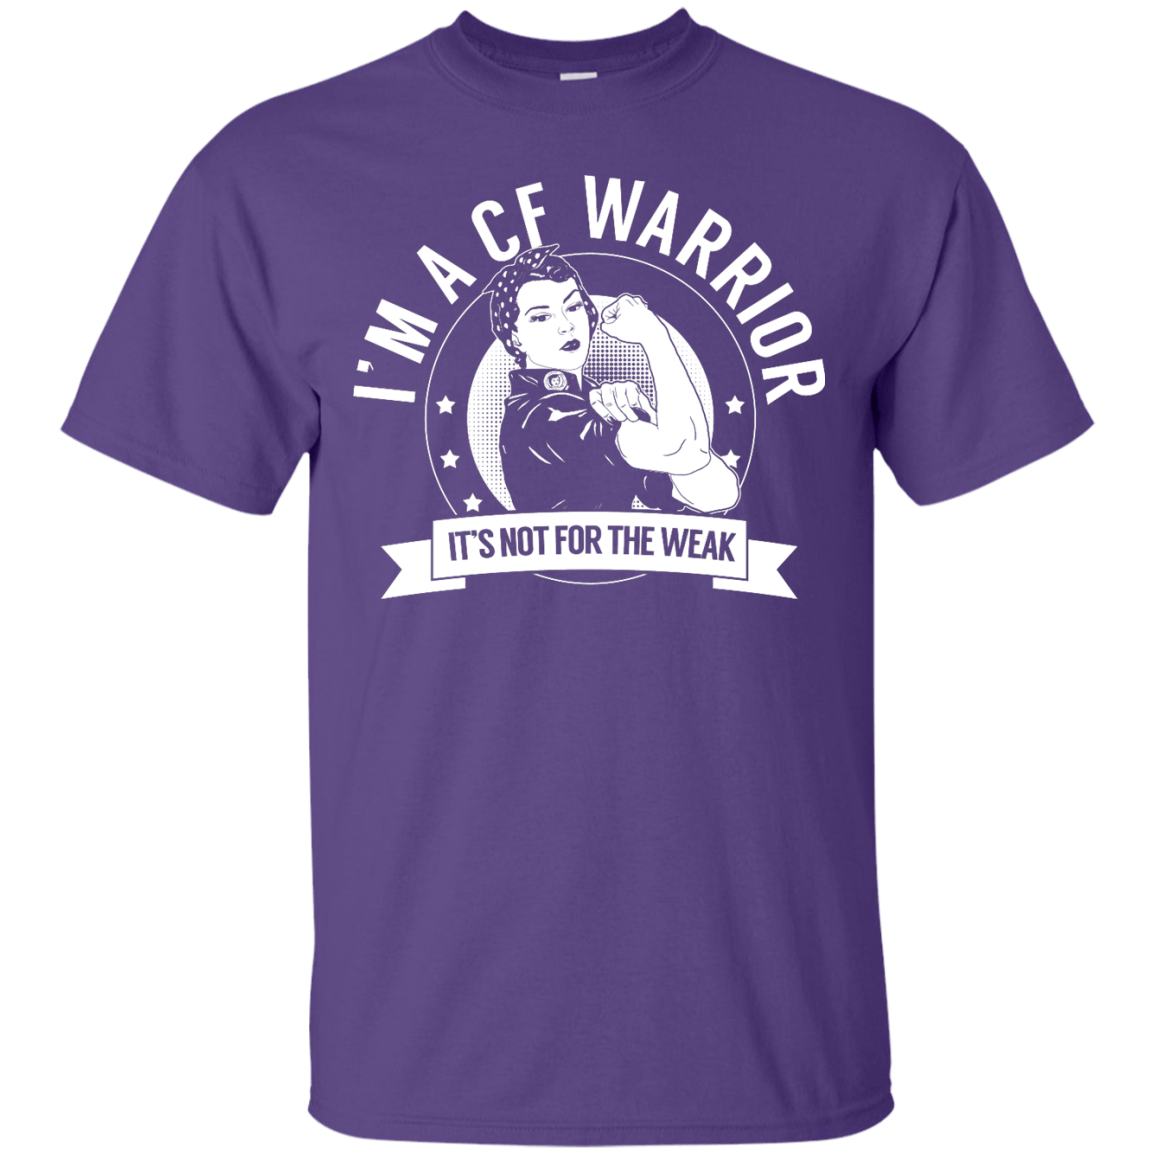 Cystic Fibrosis - CF Warrior Not For The Weak Unisex Shirt - The Unchargeables